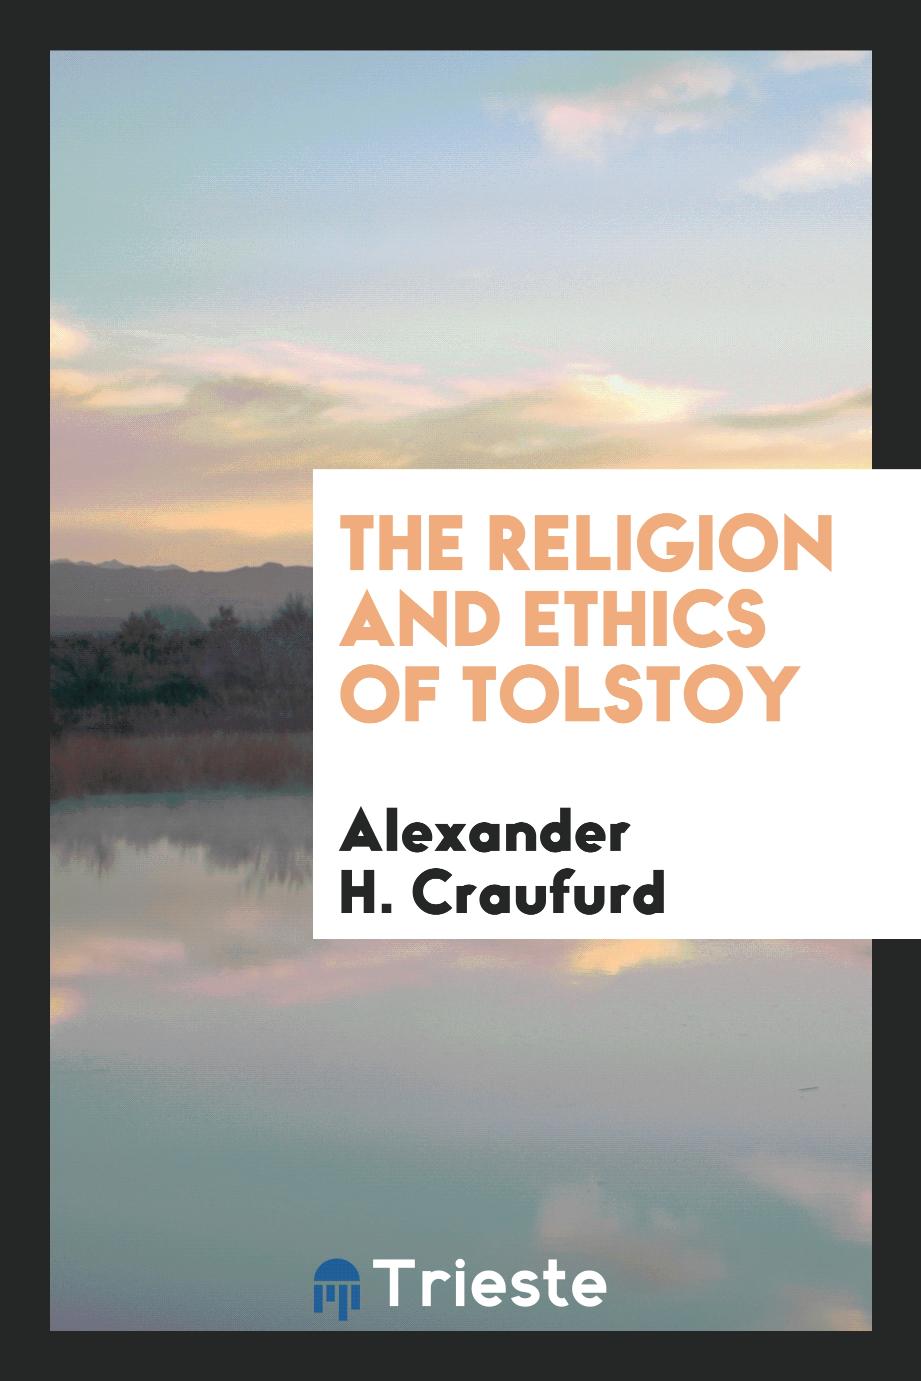 The religion and ethics of Tolstoy